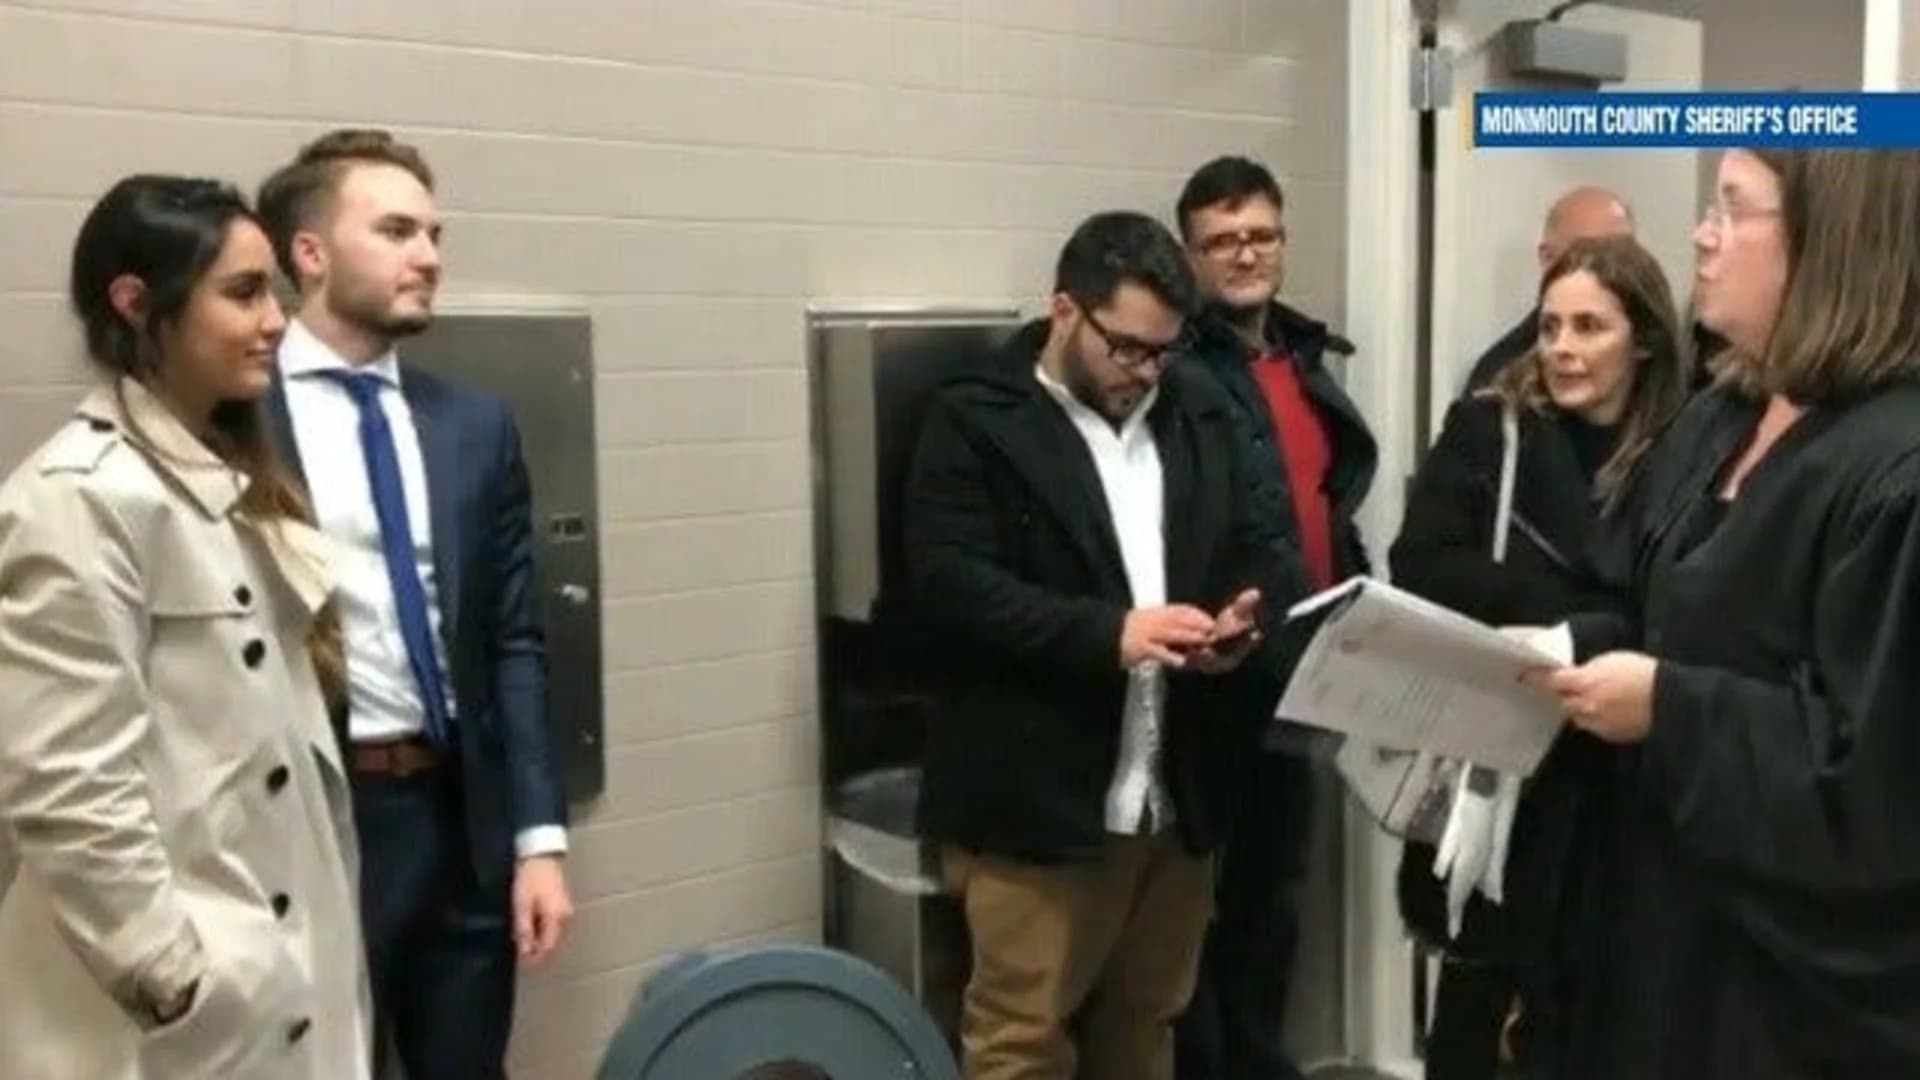 New Jersey couple gets married in courthouse bathroom